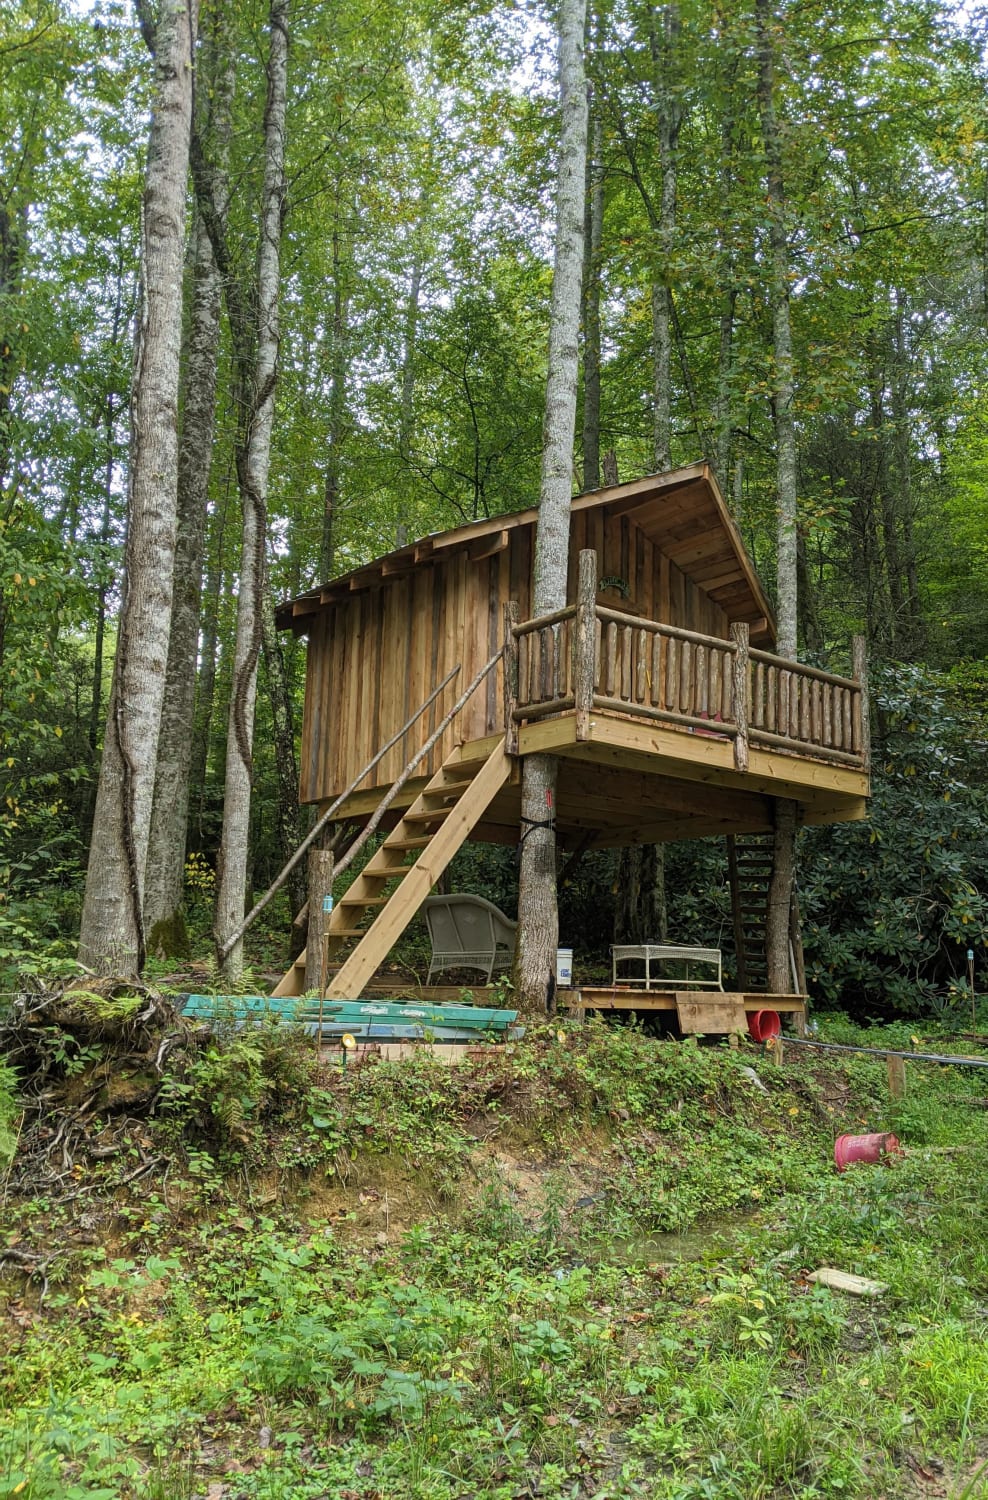 Best treehouse ever! No cell service and dense woods provide a great getaway!